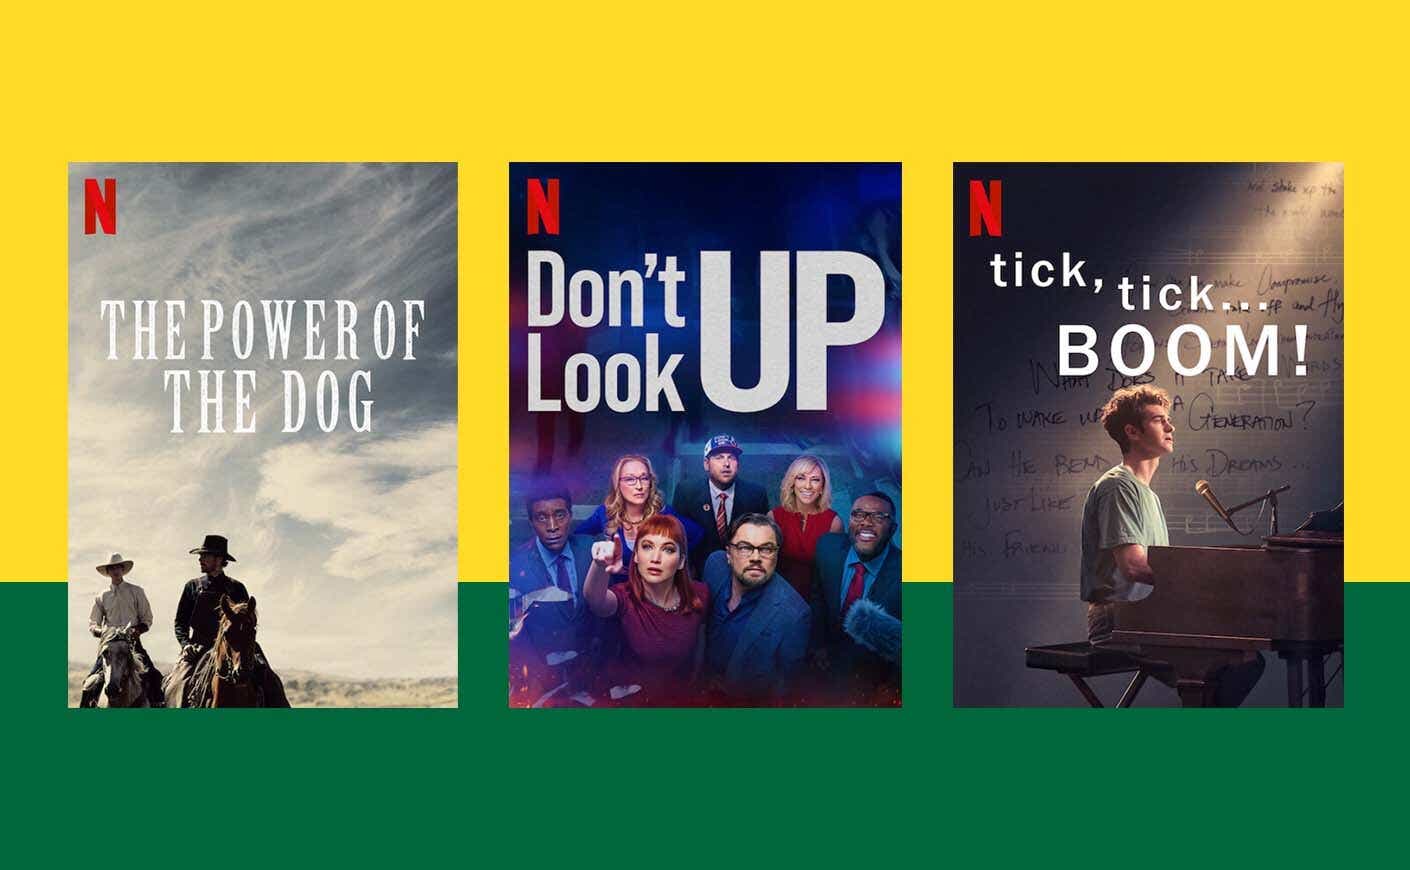 3 oscar nominated movies fro 2022: power of the dog, don't look up, and tick tick boom